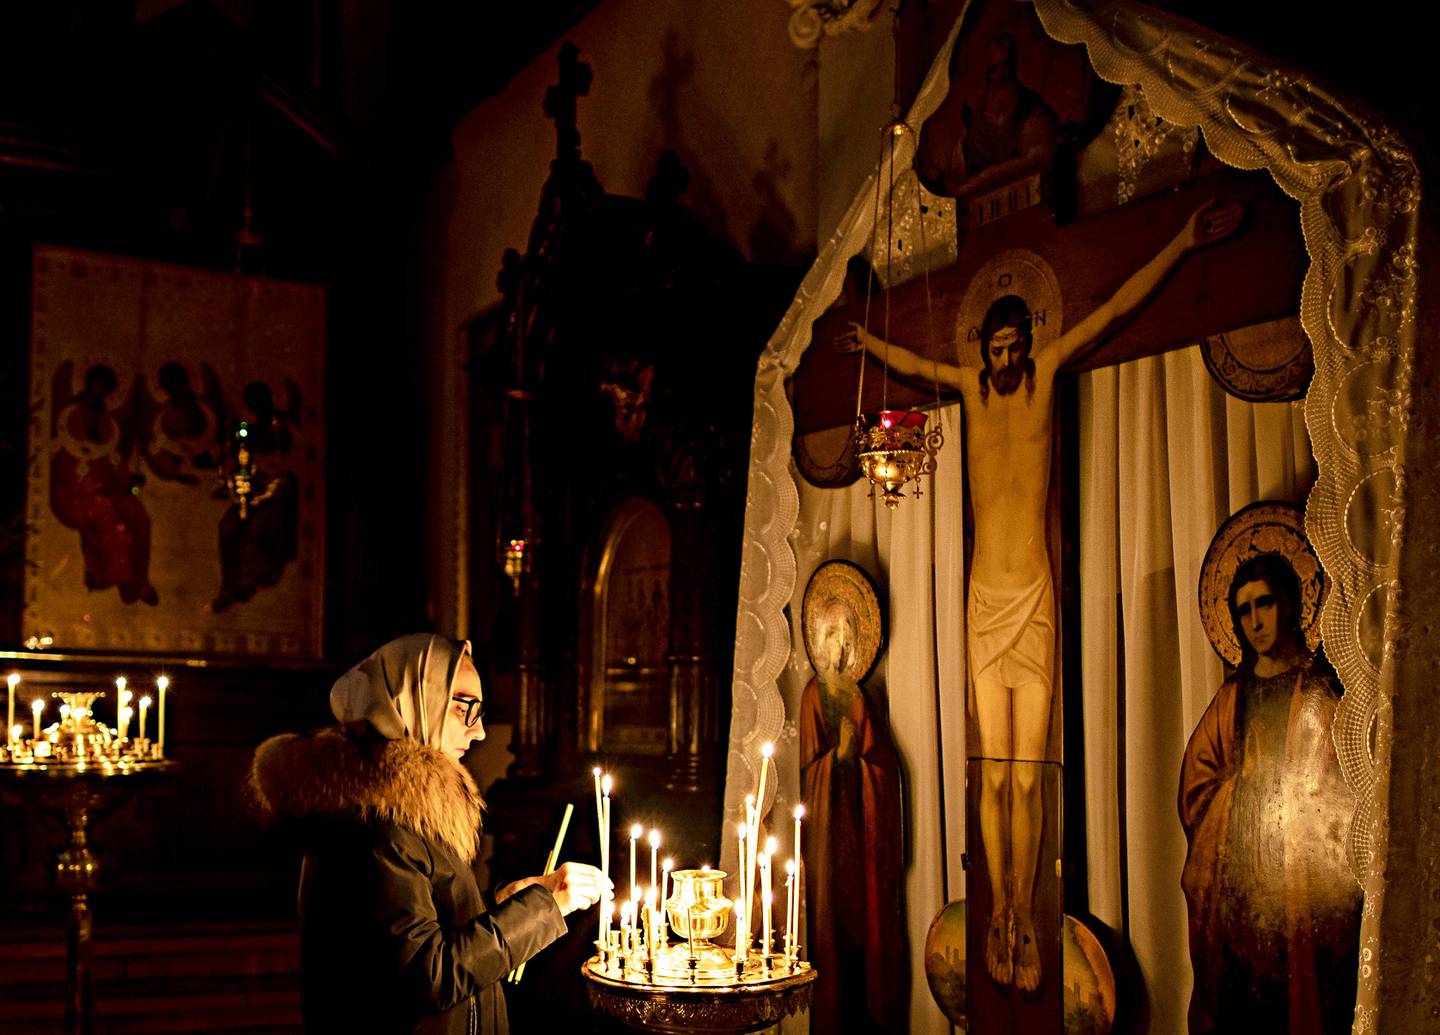 A Lithuanian Orthodox believer prays during the liturgy on Orthodox Christmas Eve in the Prechistensky, the Cathedral Palace in Vilnius, Lithuania, Monday, Jan. 6, 2020. Orthodox Christians celebrate Christmas on Jan. 7, in accordance with the Julian calendar. (AP Photo/Mindaugas Kulbis)